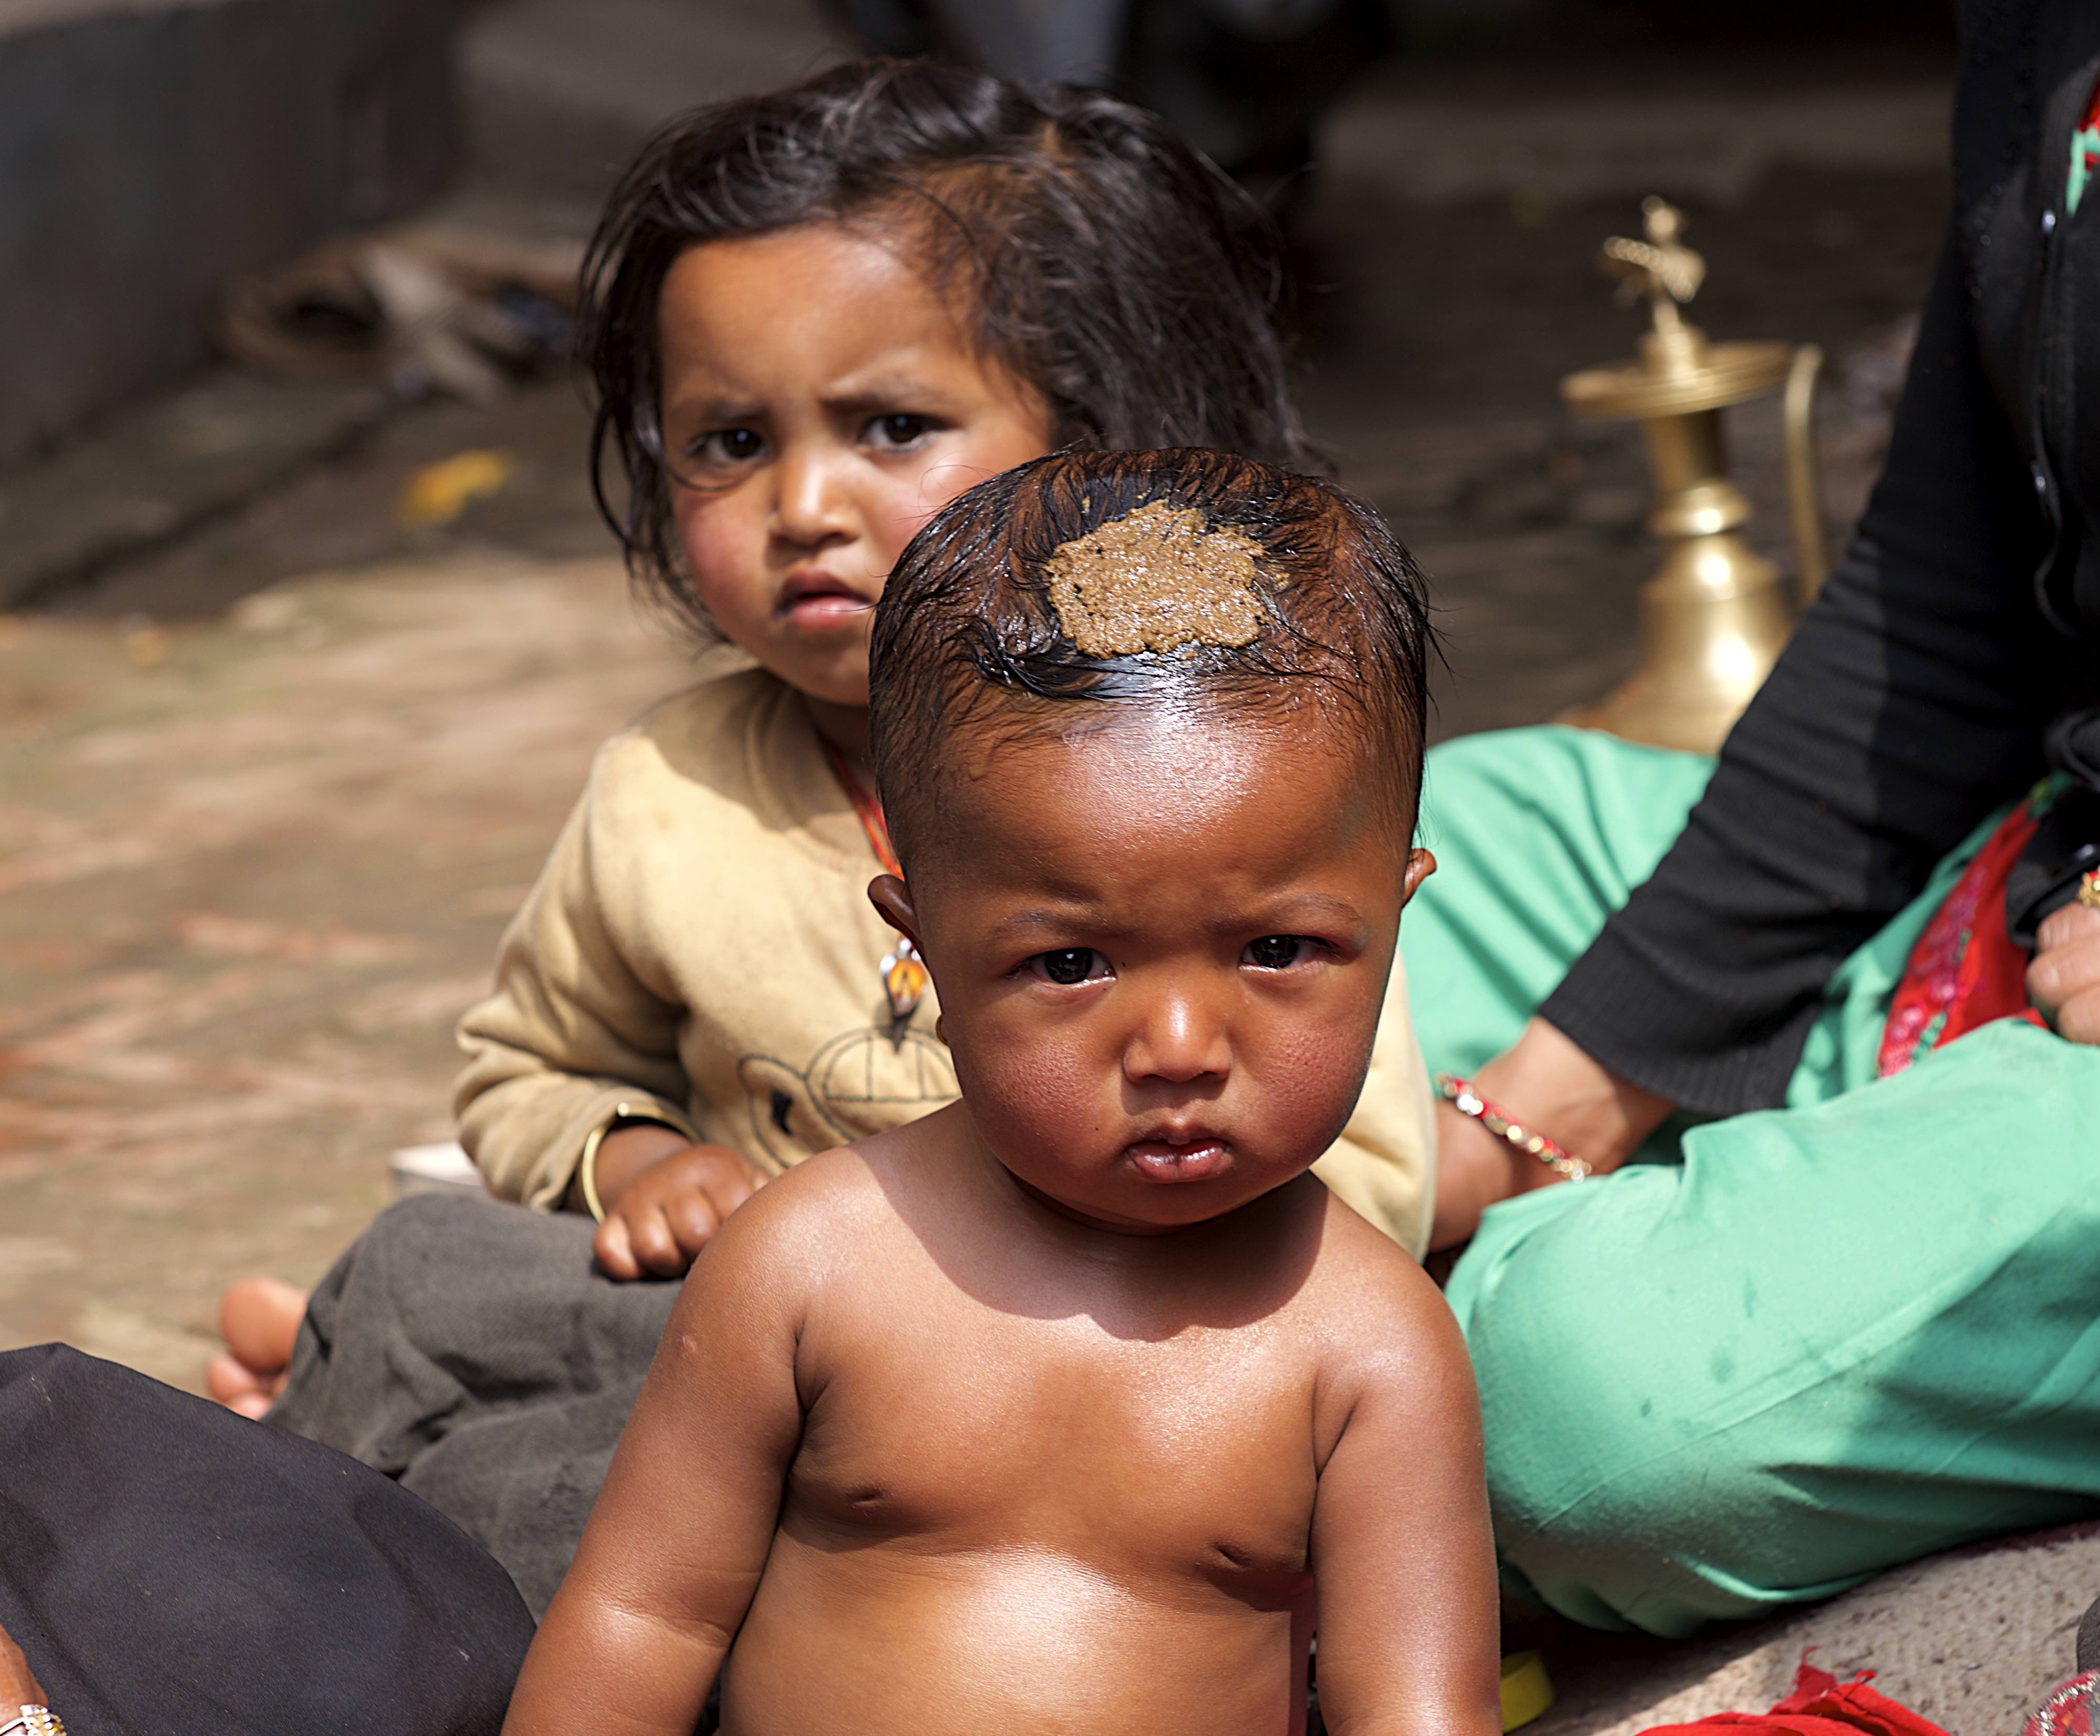 The “Great Quake’s” effect on the most vulnerable population of Nepal.